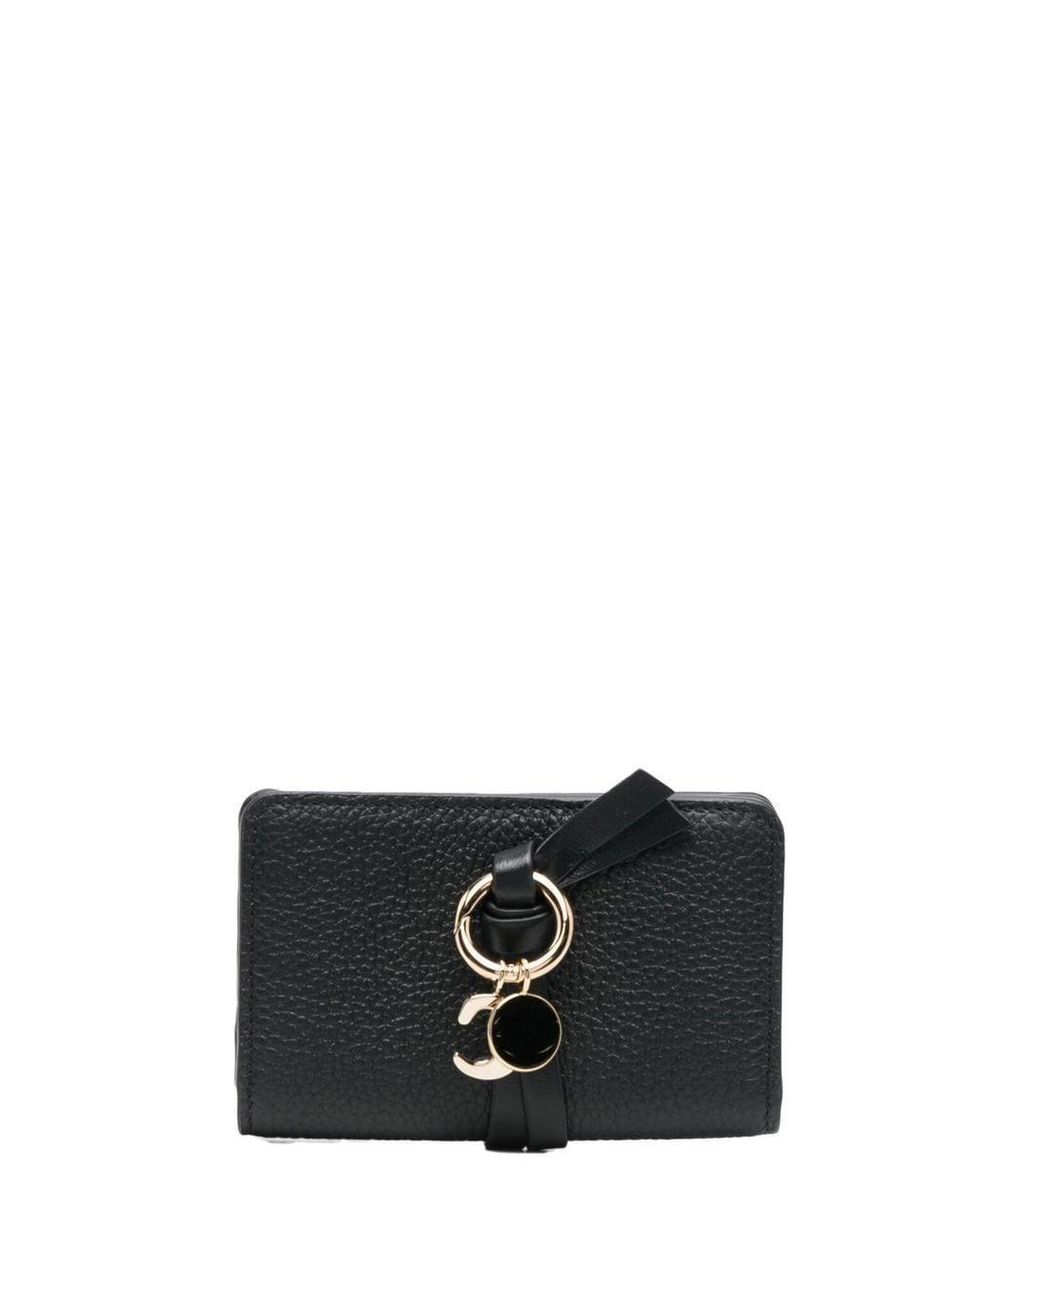 Chloé Alphabet Trifold Leather Wallet in Black | Lyst